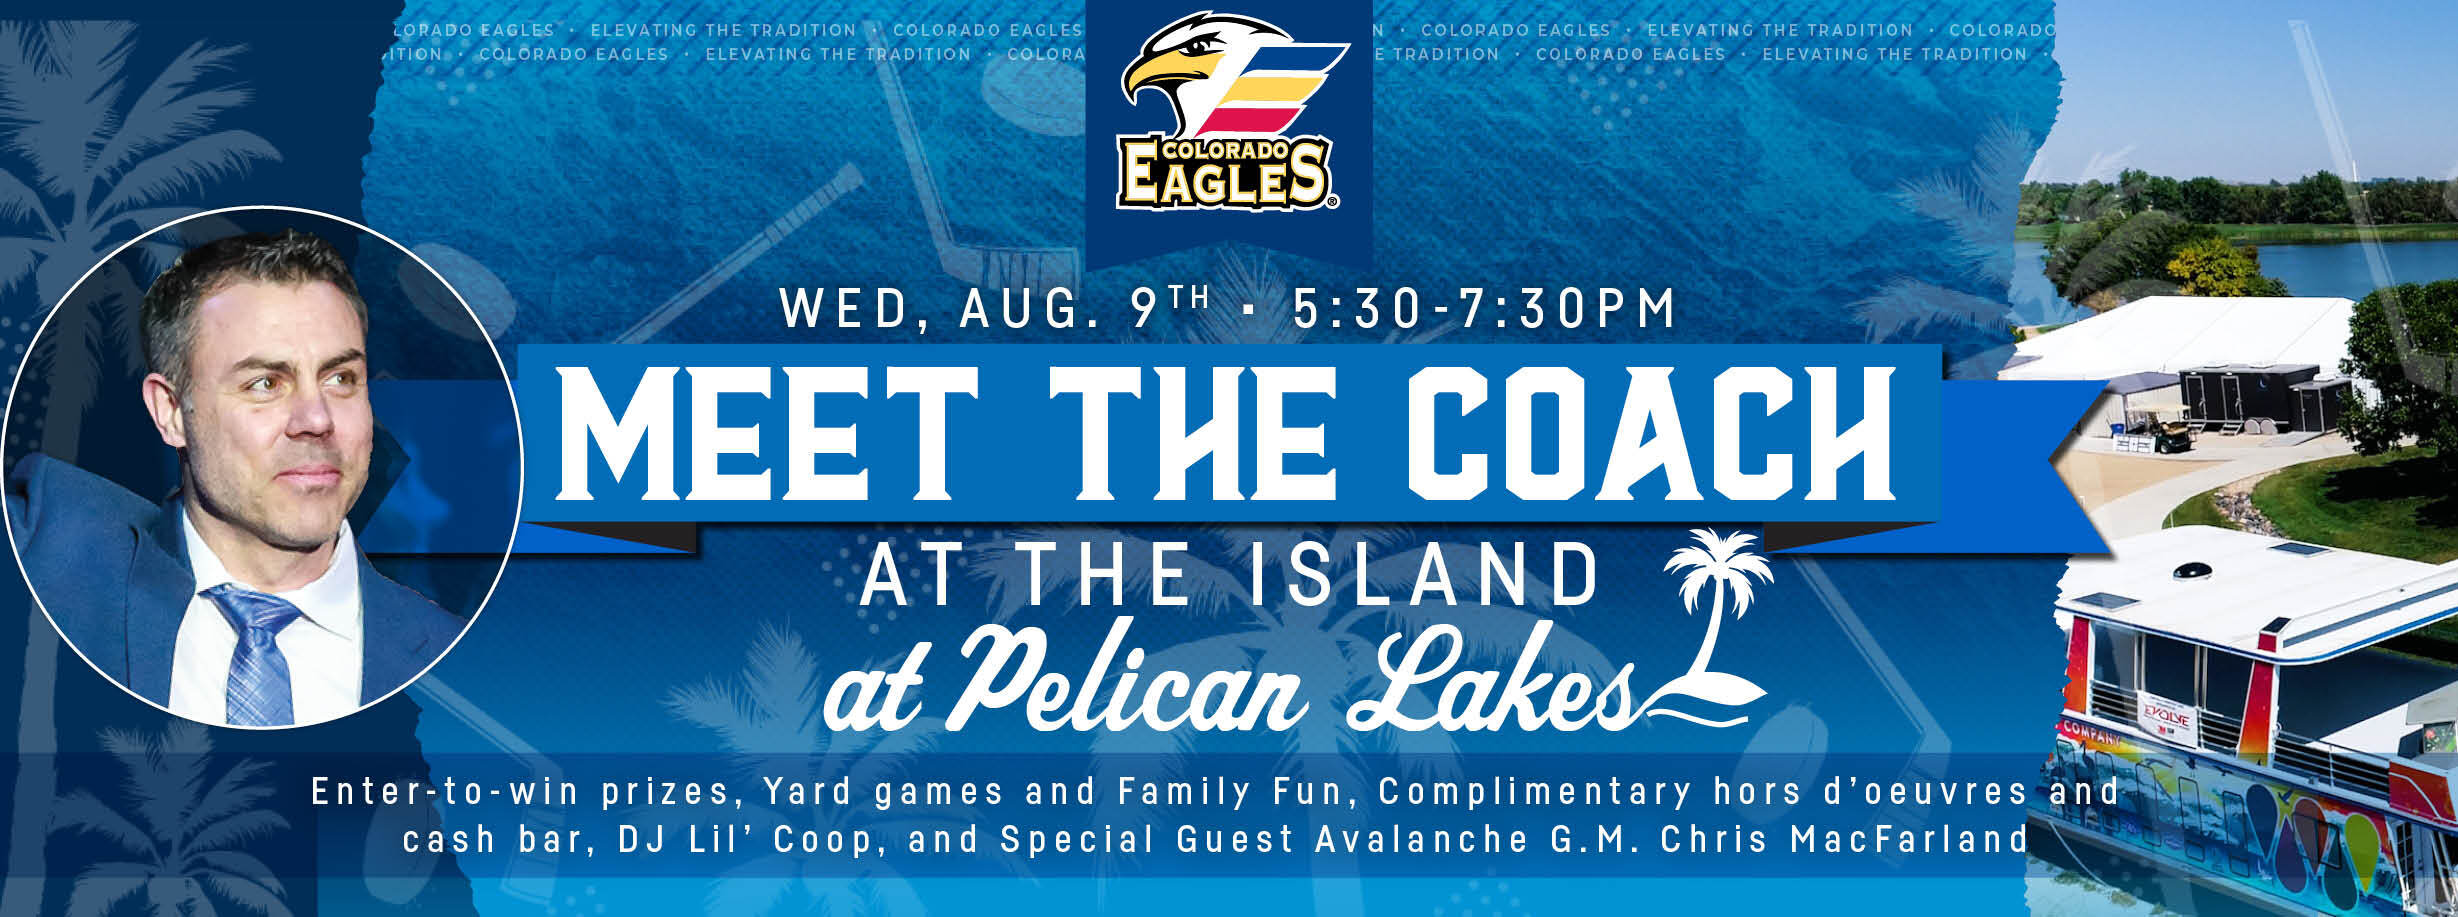 Eagles to Introduce Schneekloth at “Meet the Coach” Party 